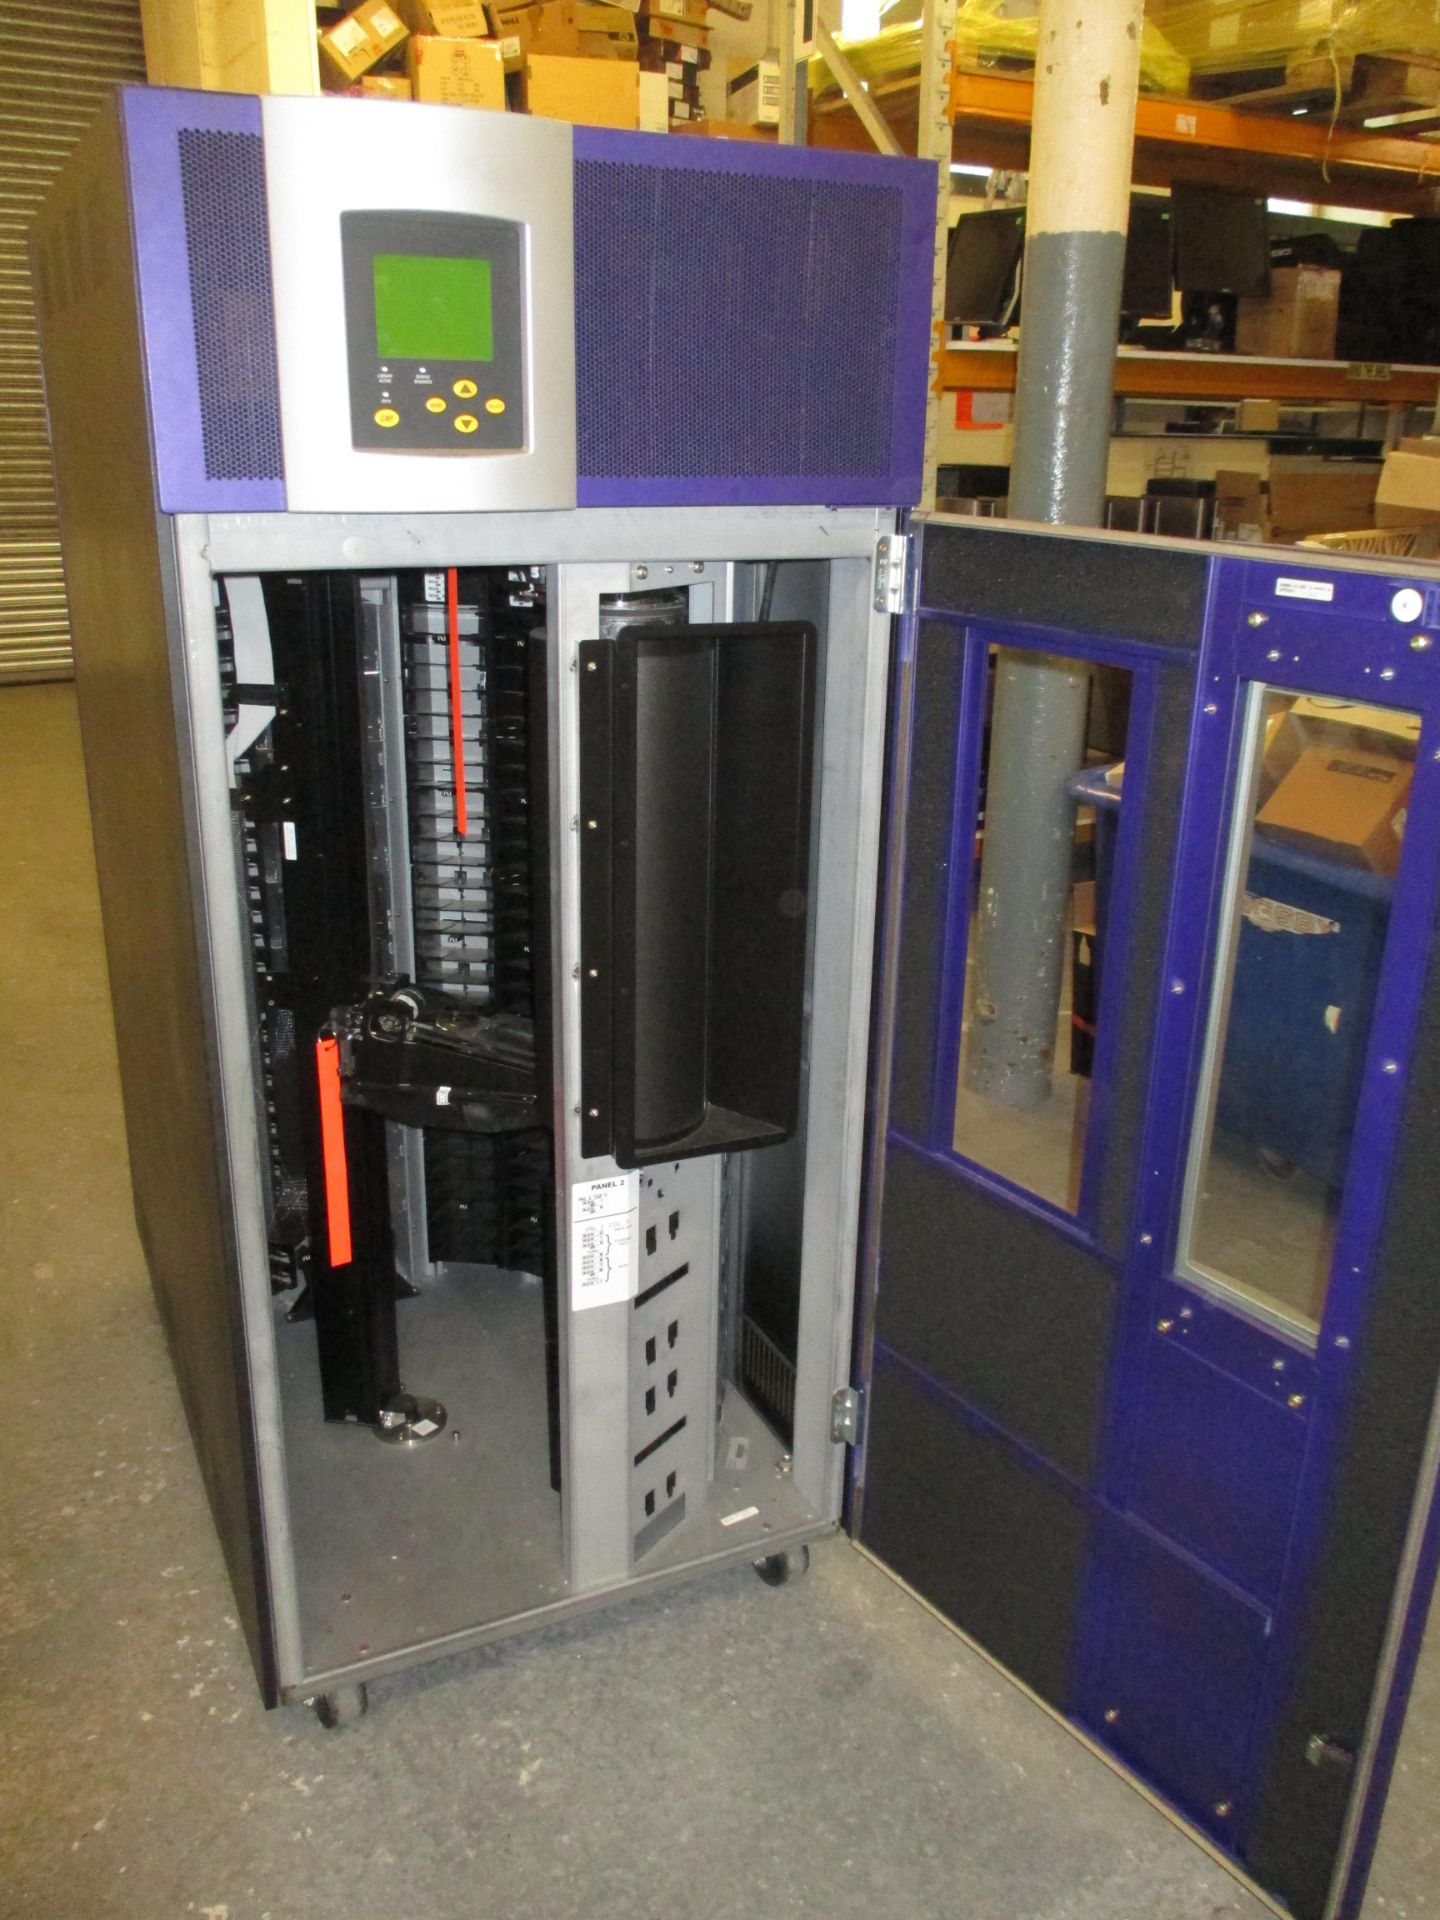 STORAGE TEK L180 TAPE LIBRARY CONTAINING 6 X 1BM LTO2-OO1 FIBER TAPE DRIVES. WITH KEY - Image 4 of 8